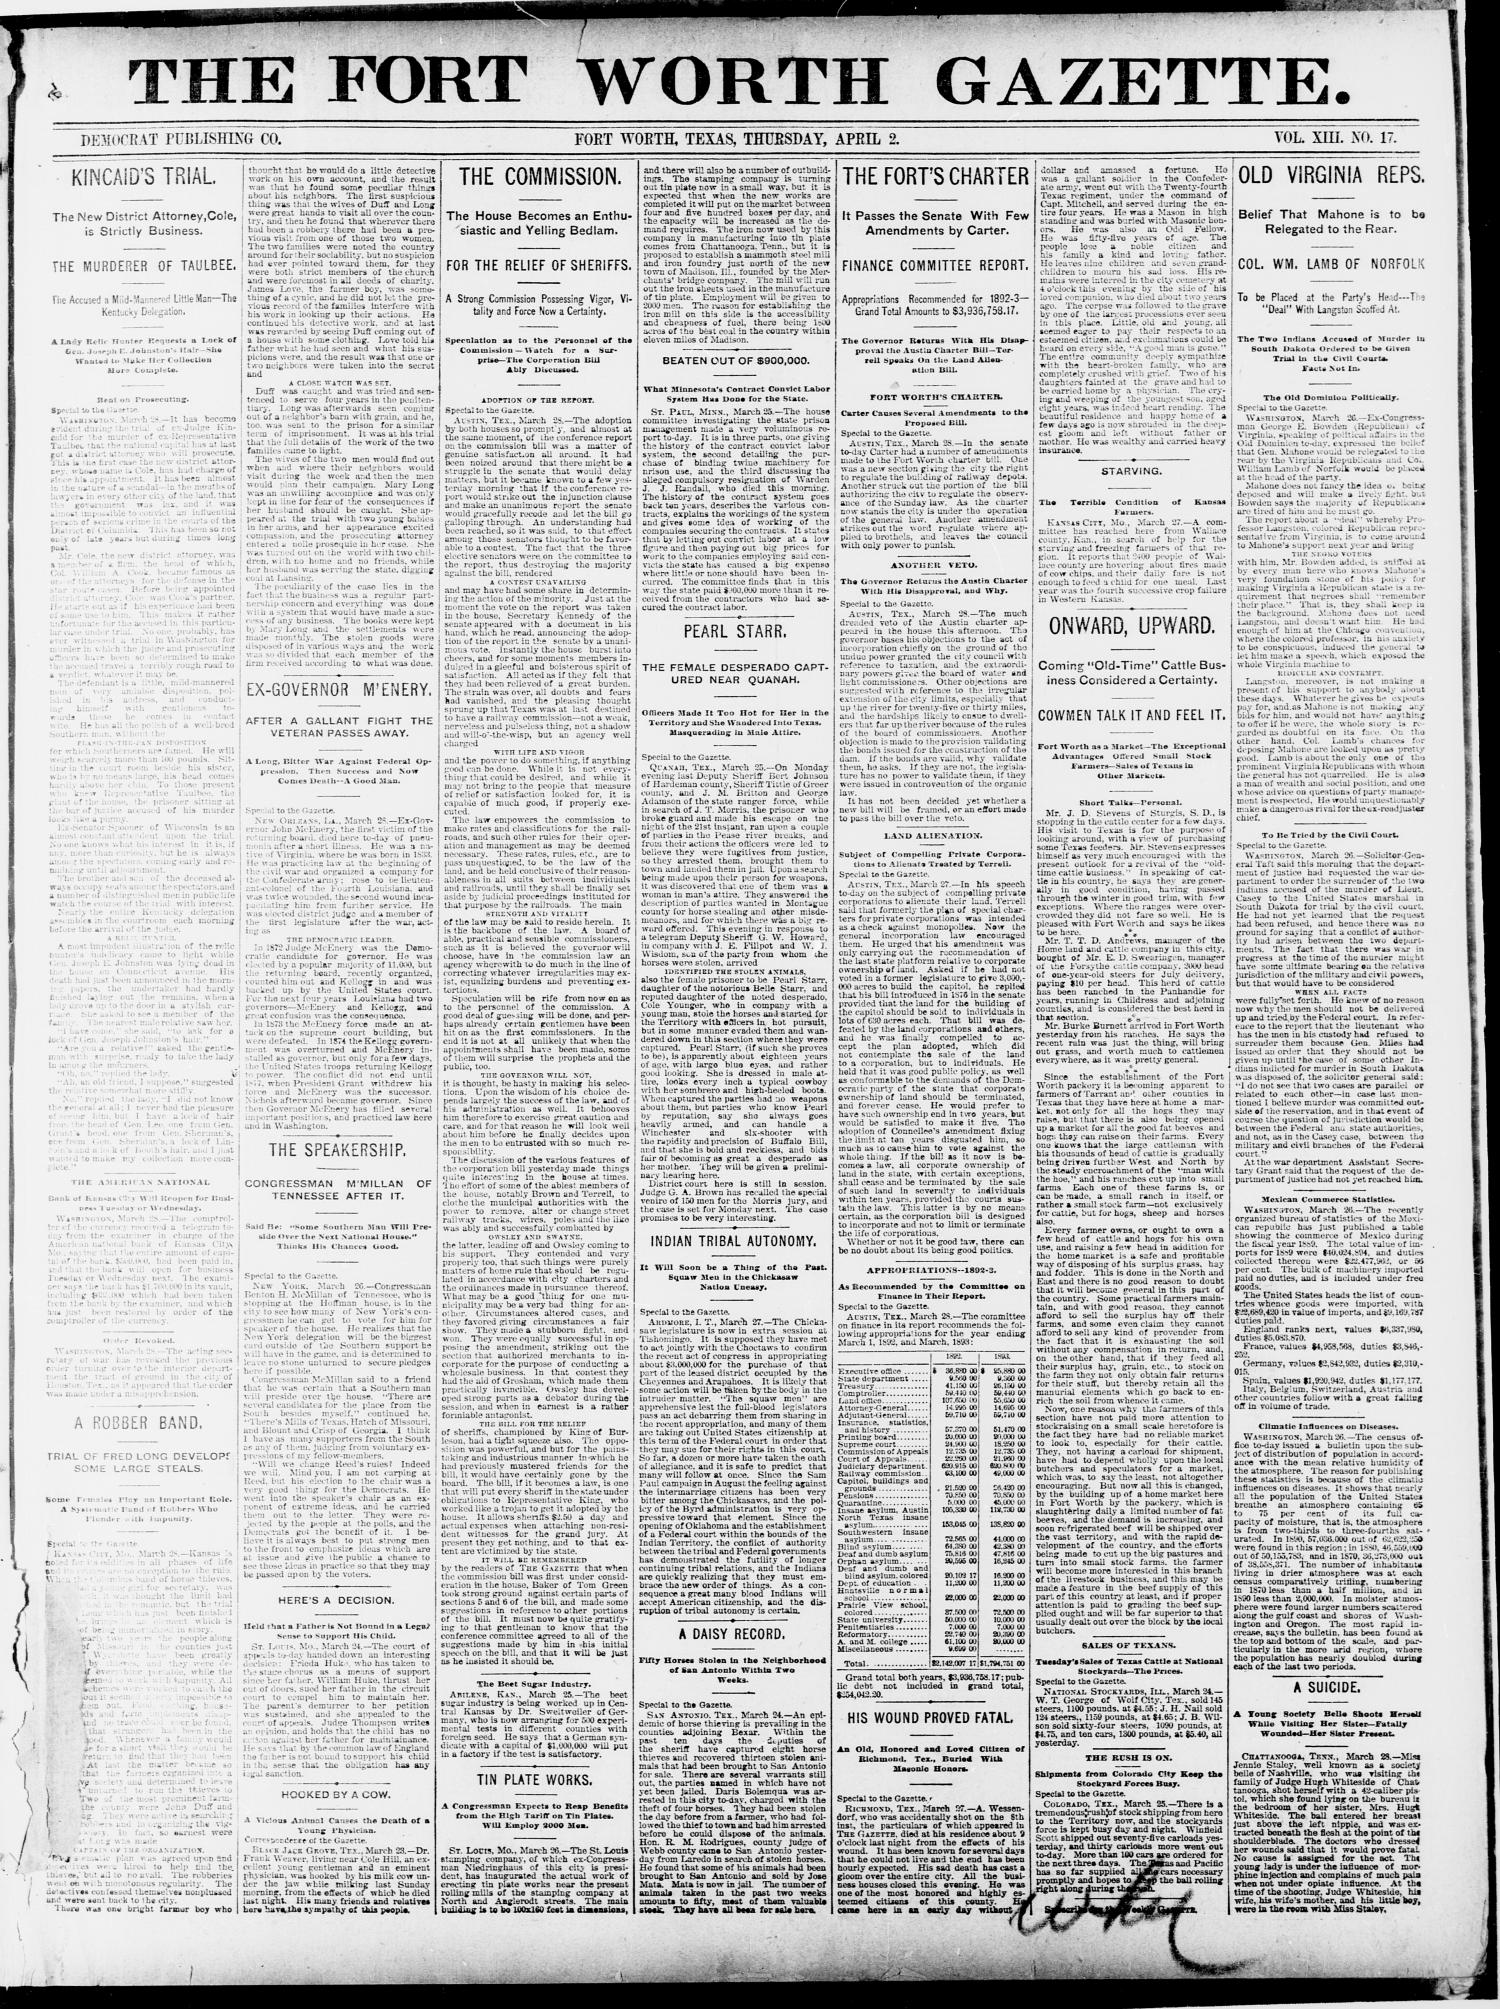 Fort Worth Gazette. (Fort Worth, Tex.), Vol. 13, No. 17, Ed. 1, Thursday, April 2, 1891
                                                
                                                    [Sequence #]: 1 of 20
                                                